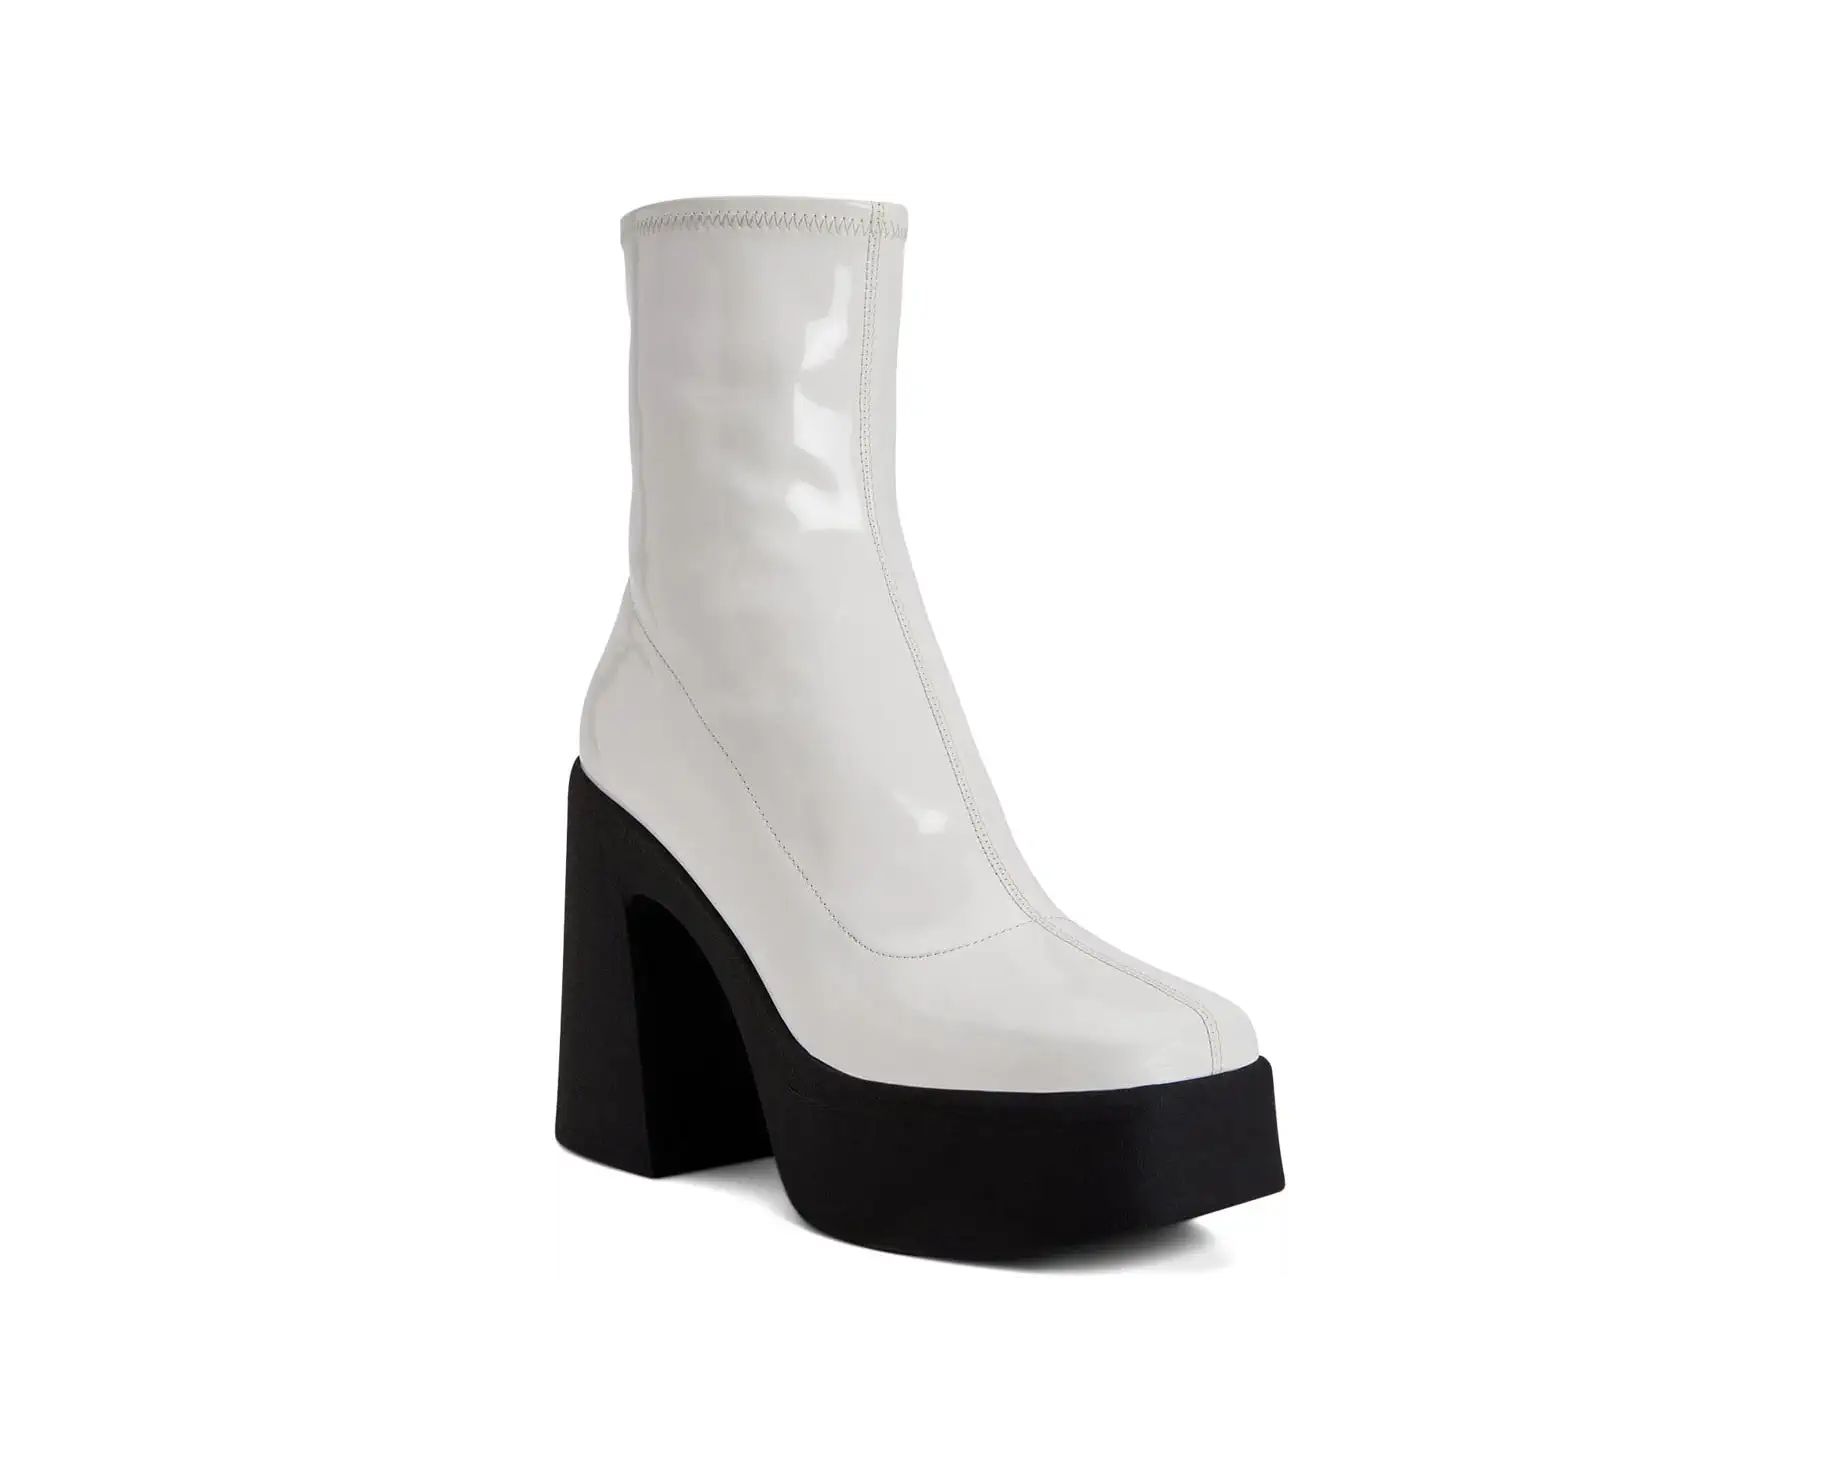 Katy Perry The Heightten Stretch Bootie | Zappos